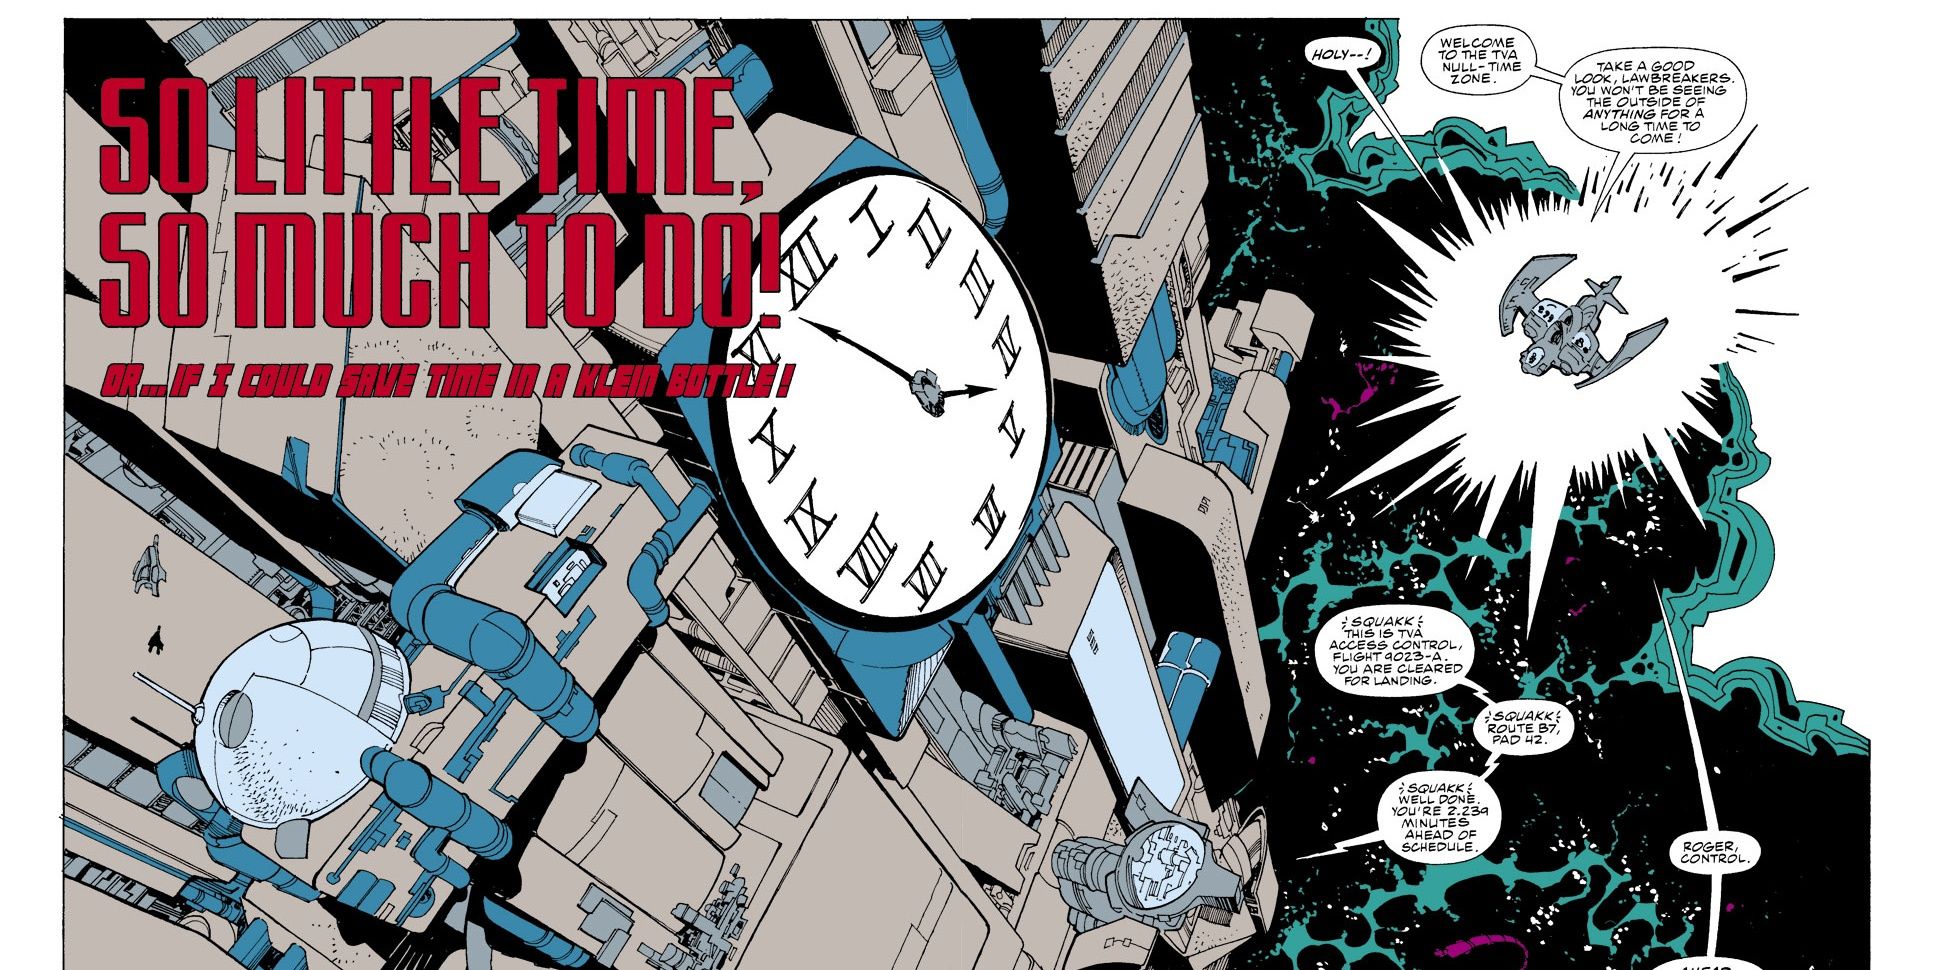 Fantastic Four Vol 1 353 Time Variance Authority Null-Time Zone large clock on a building in space